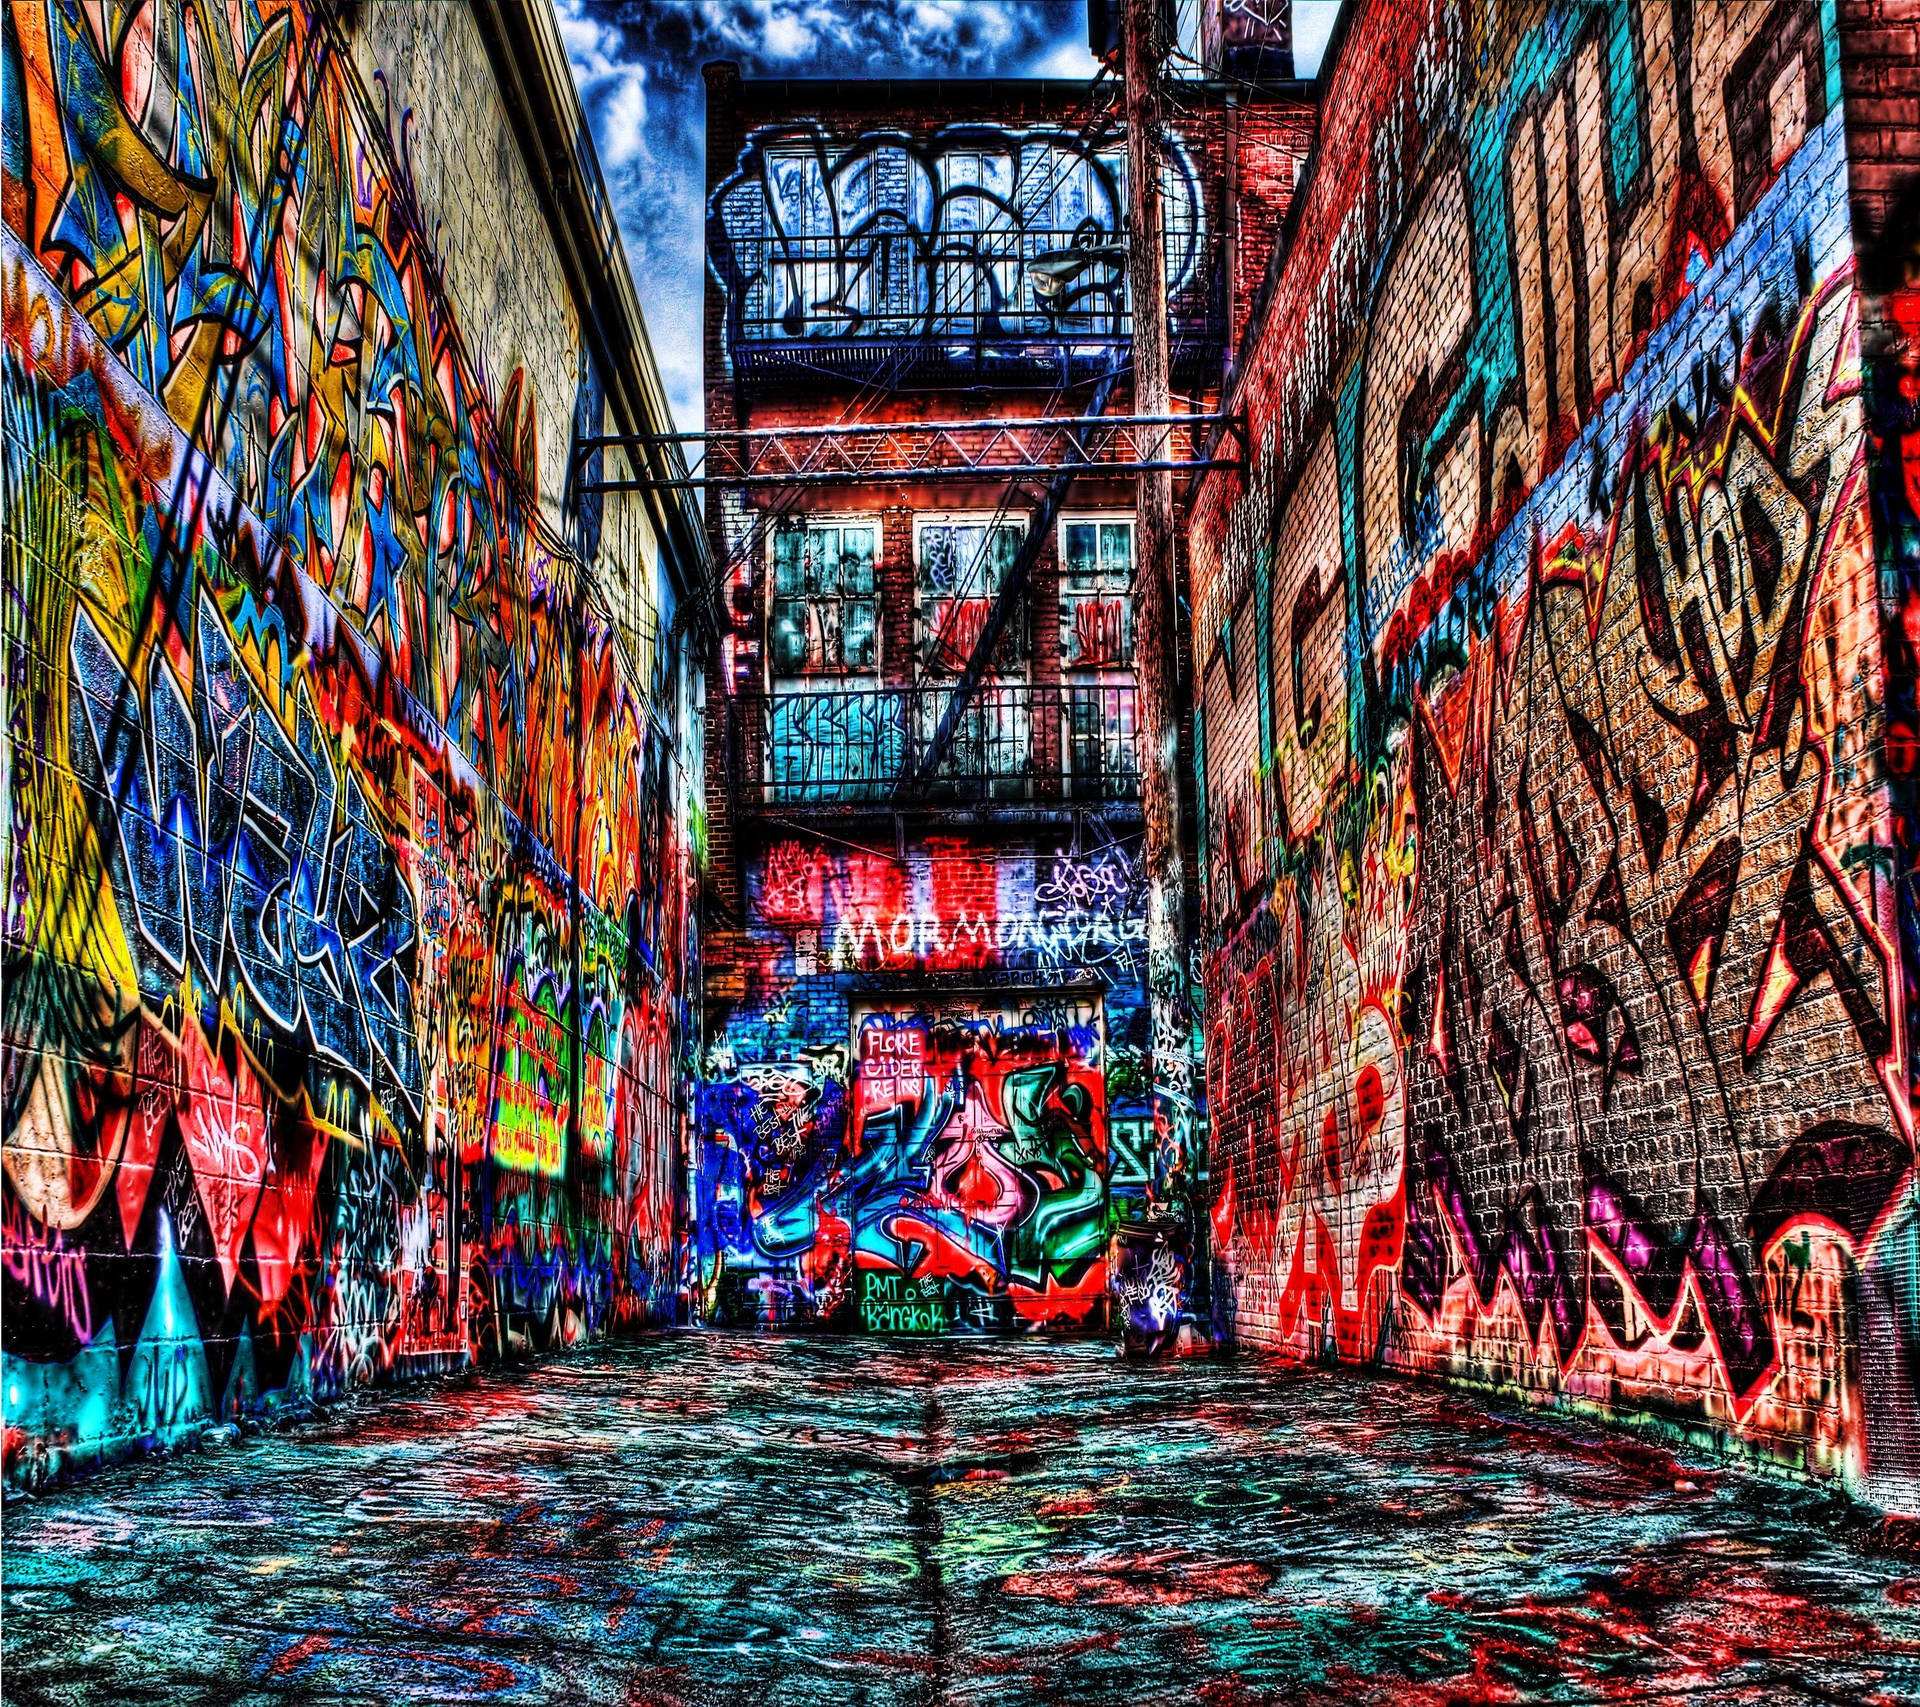 Wallpaper of large city buildings completely filled with graffiti.